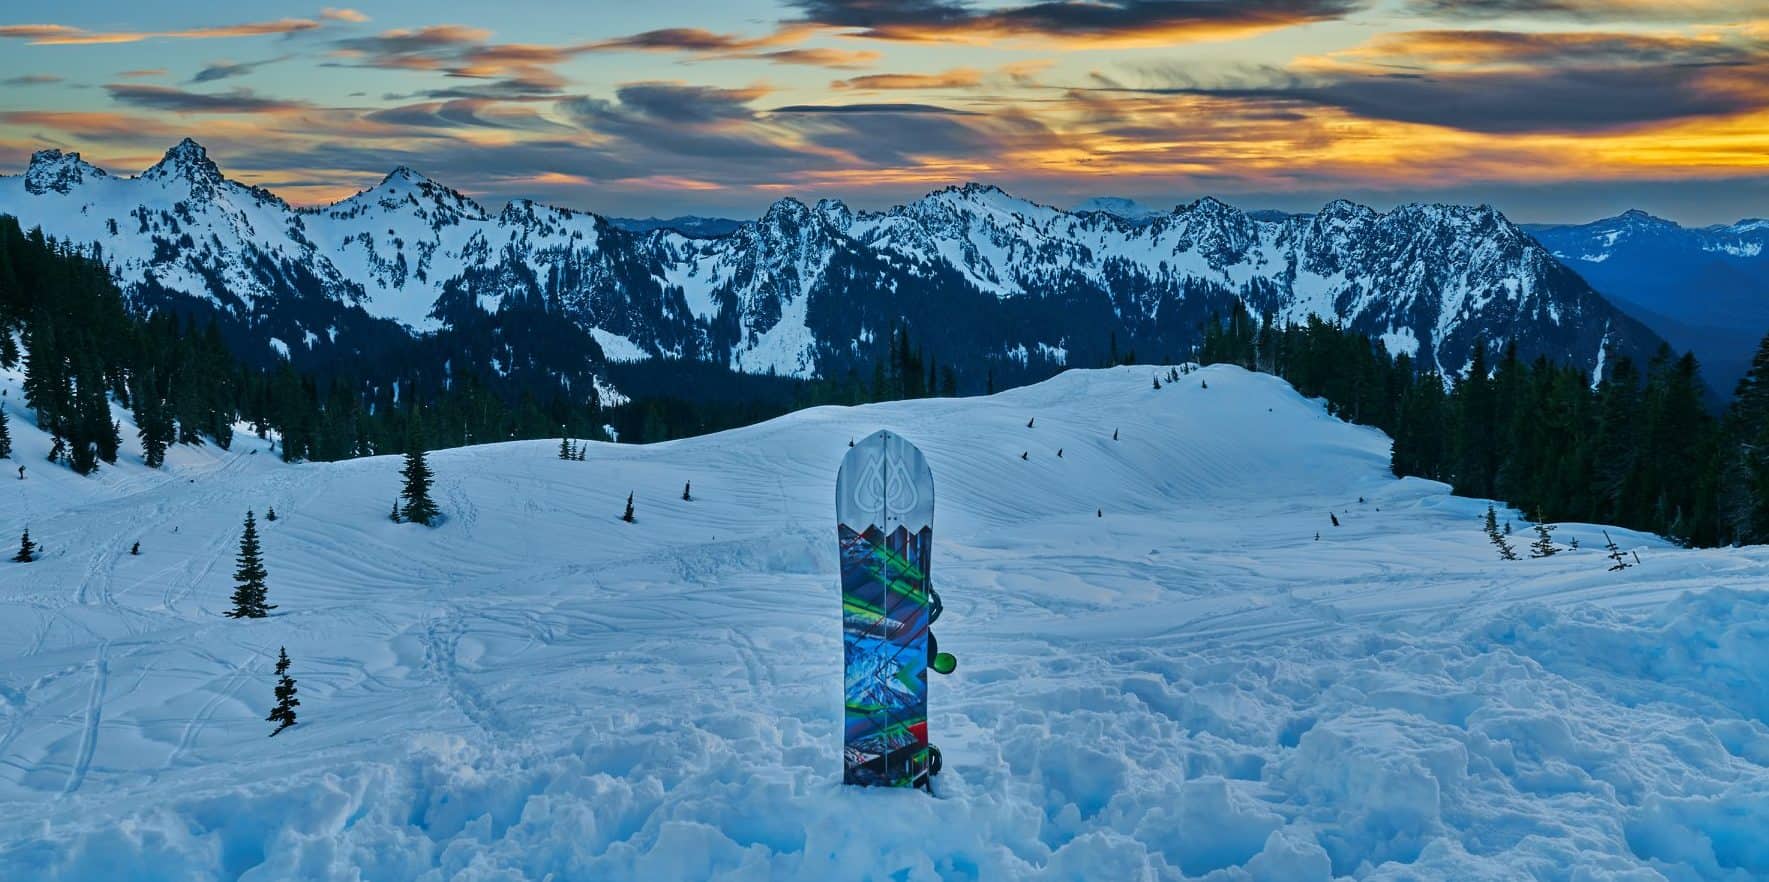 Backcountry Skiing and Boarding at Mount Rainier National Park